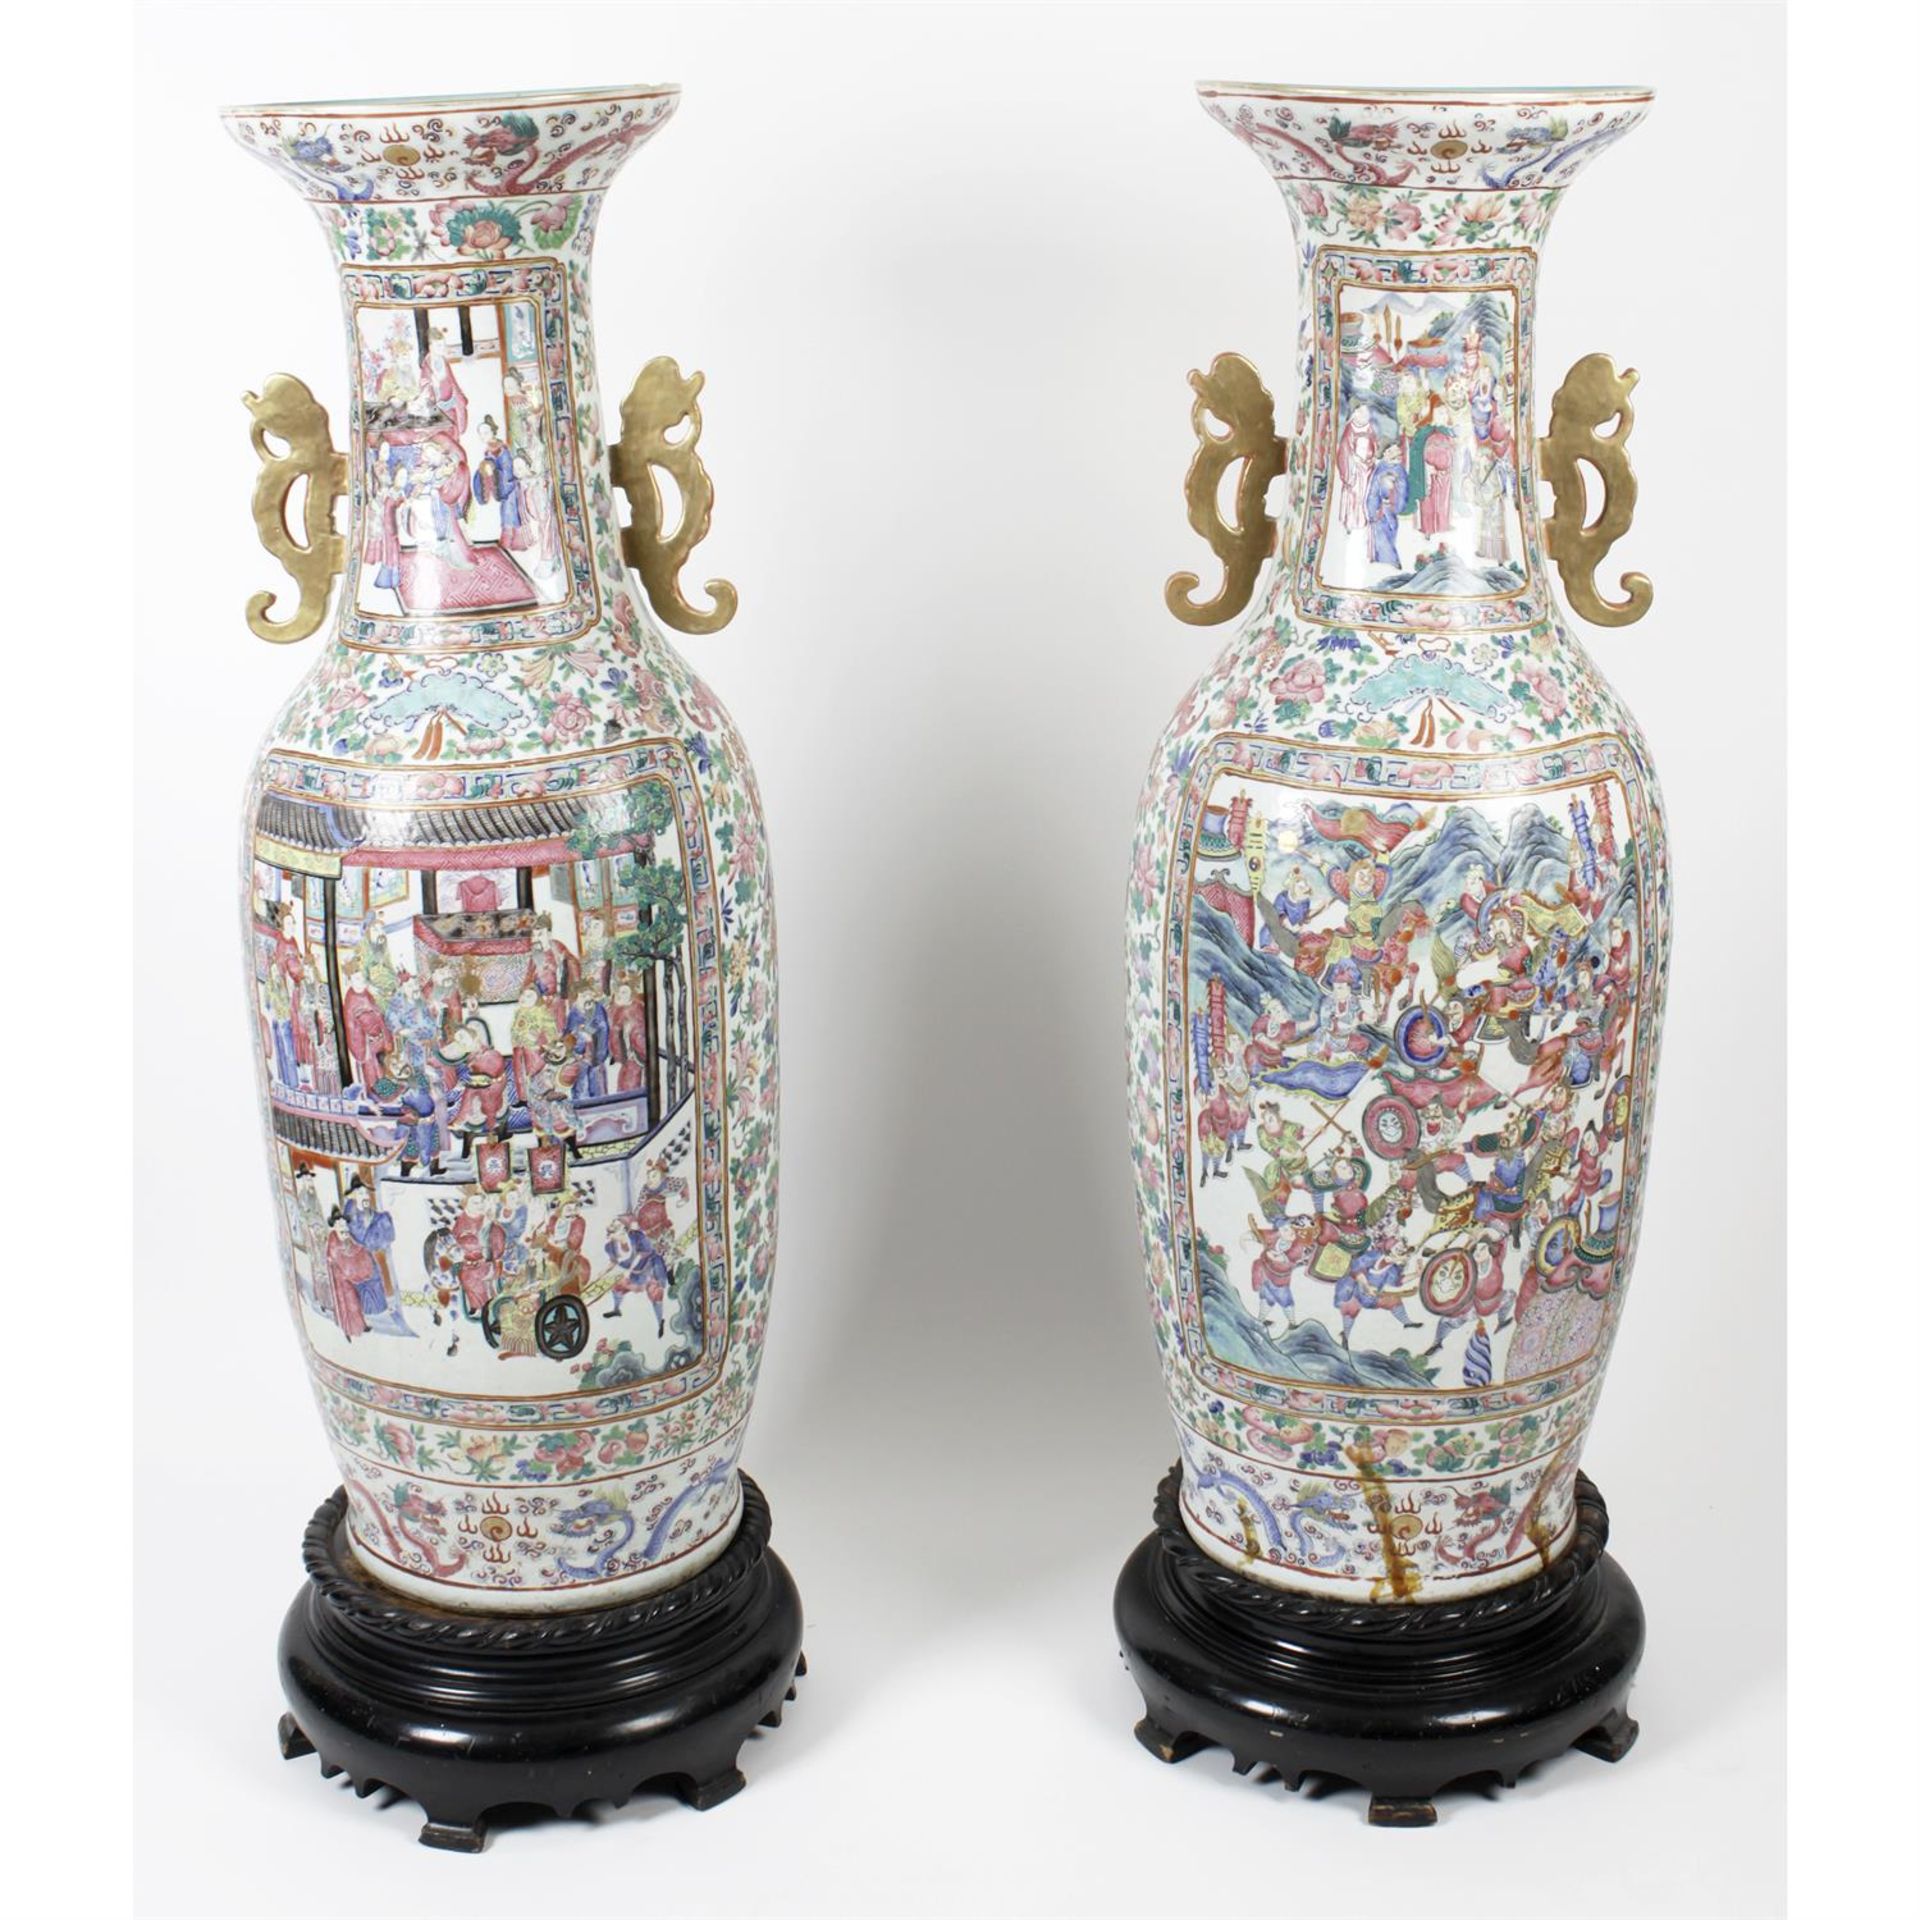 A pair of impressive, large mid-19th century Cantonese porcelain vases. - Image 2 of 20